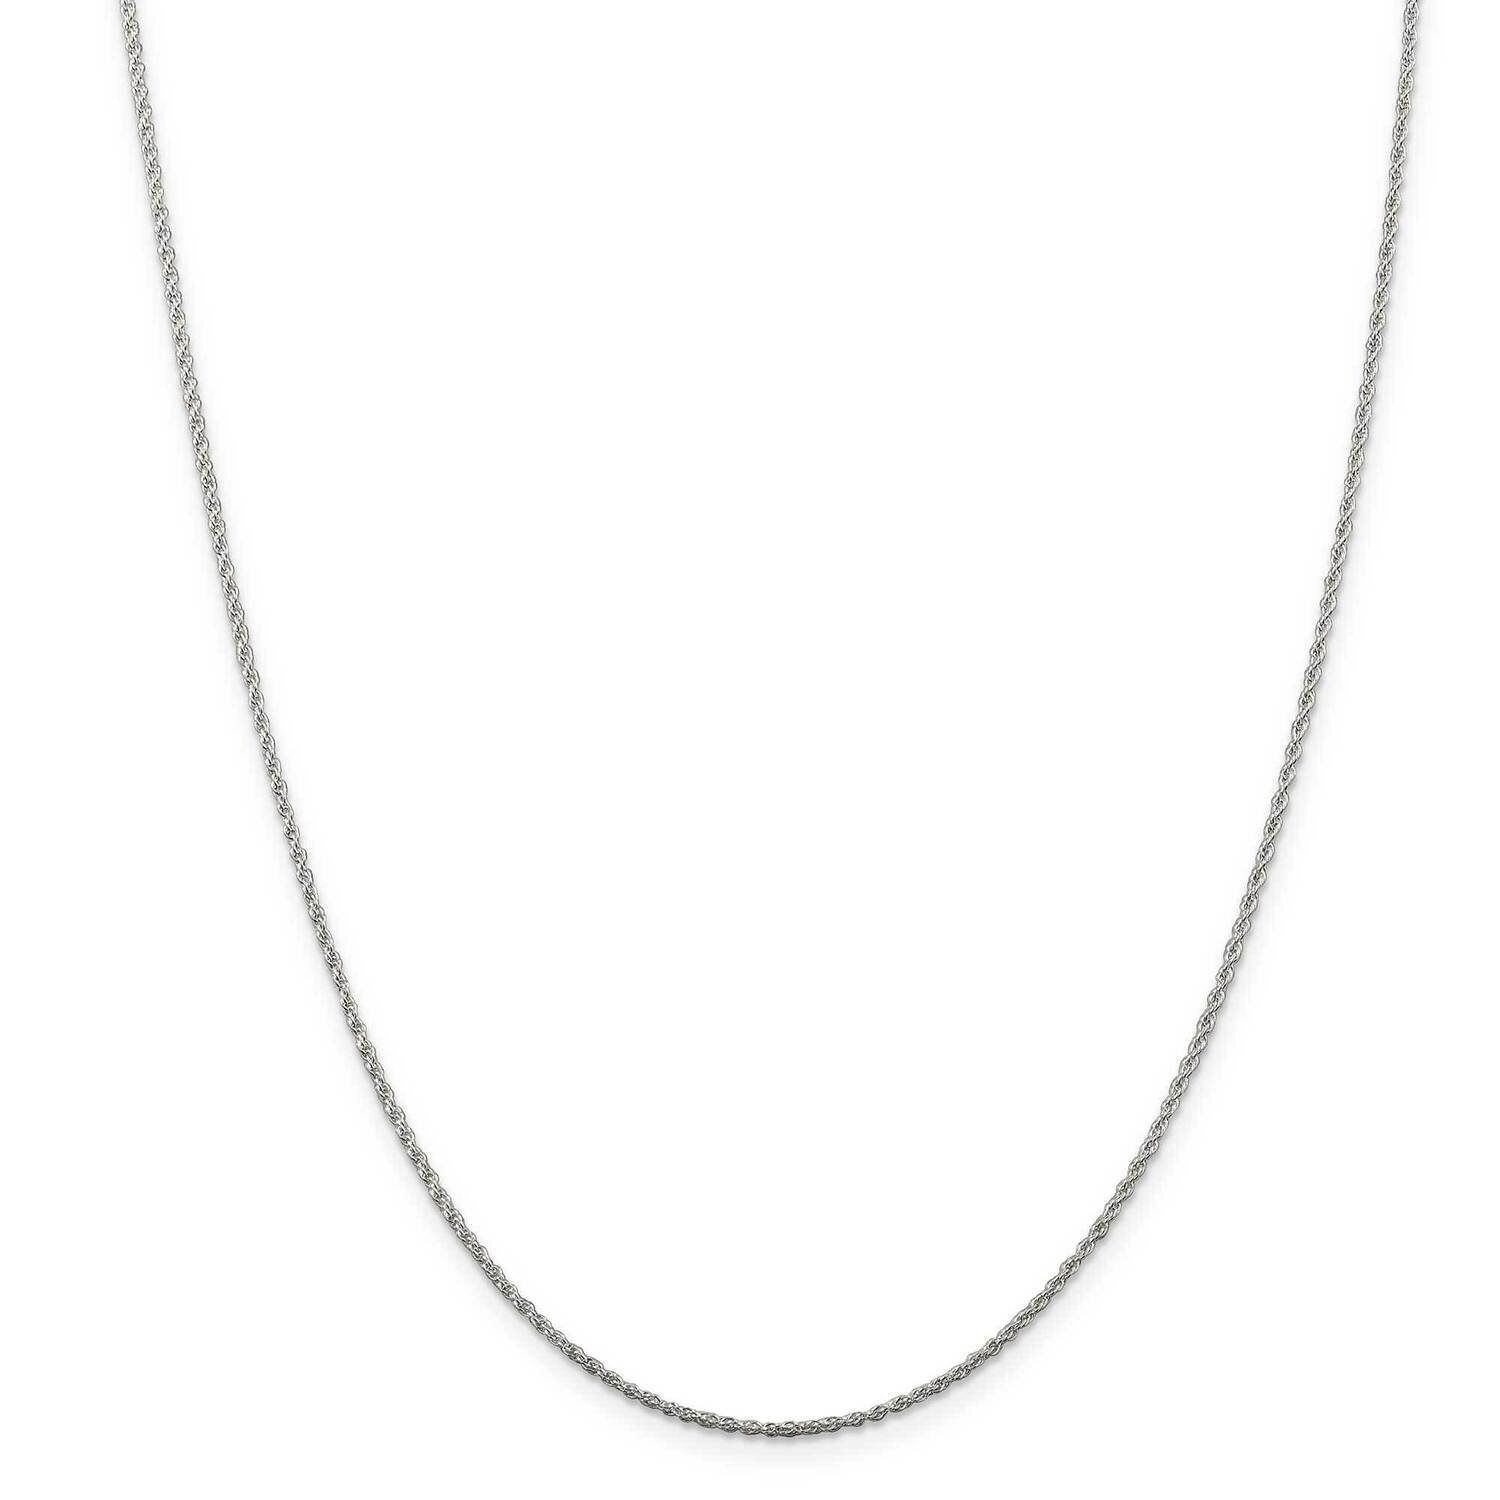 1.3mm Loose Rope Chain 14 Inch Sterling Silver Rhodium-Plated QFC67R-14